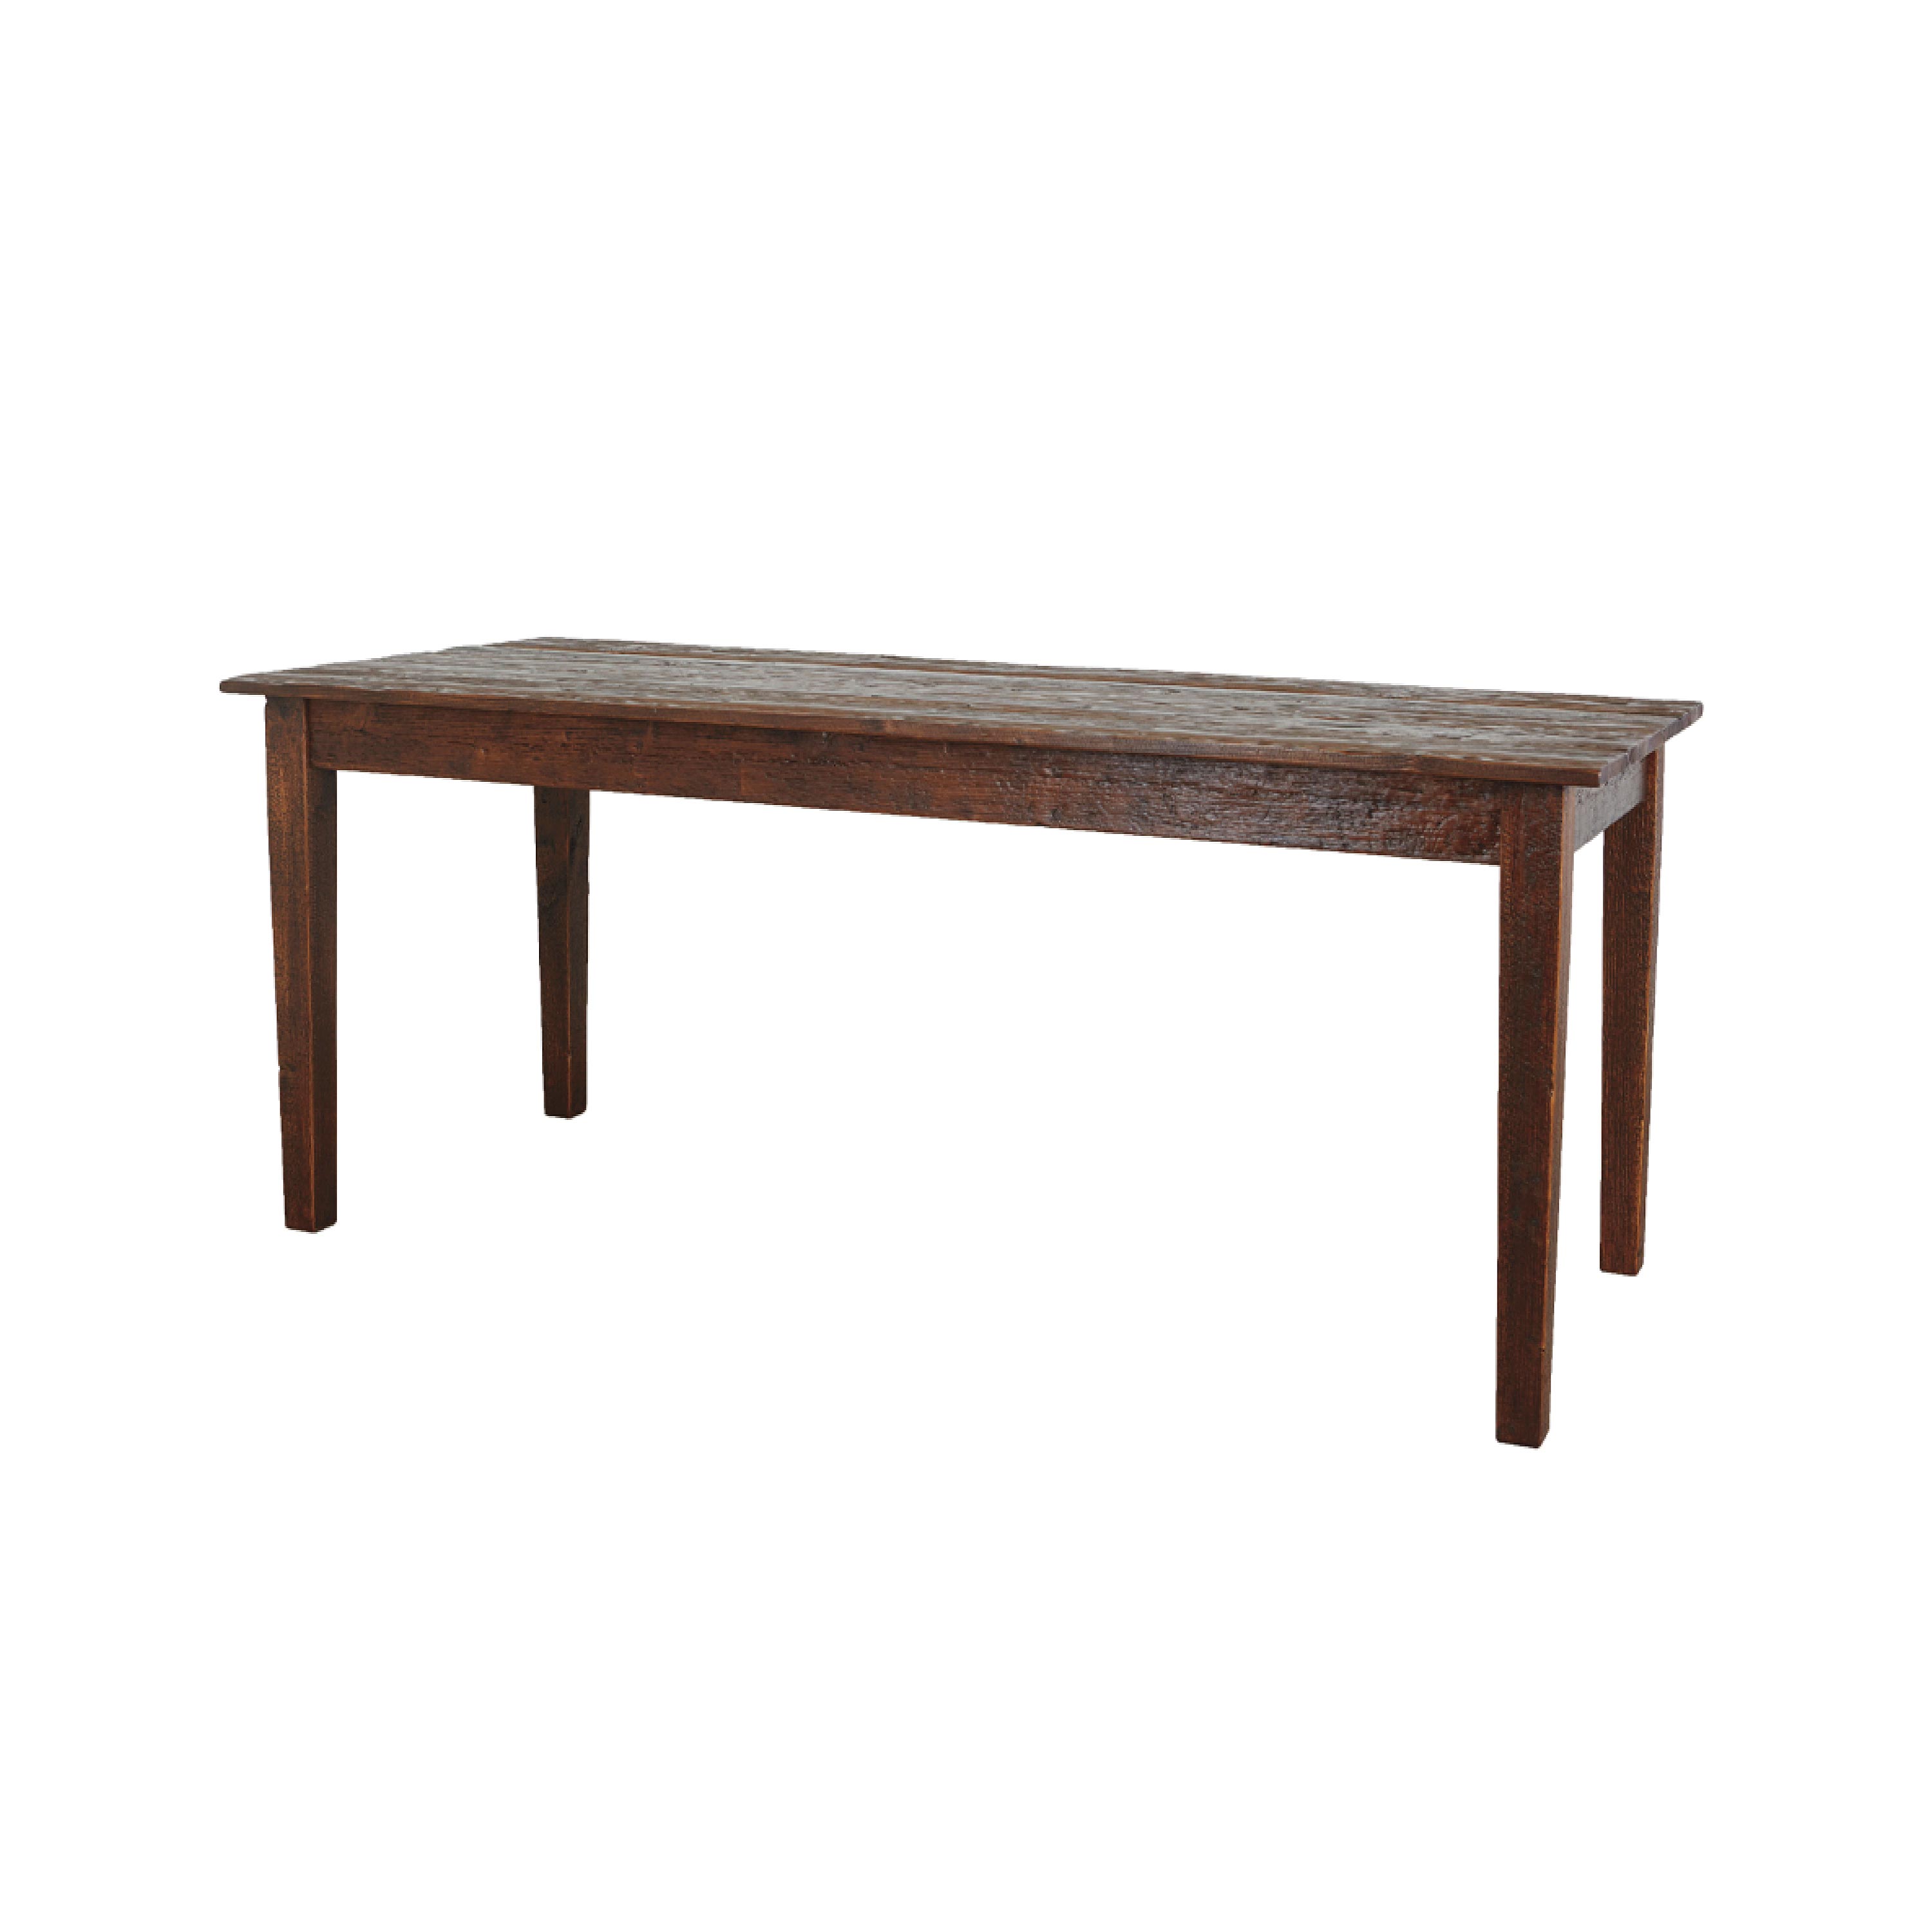 Reclaimed Wood Provence Farm Table, 6ft swatch image